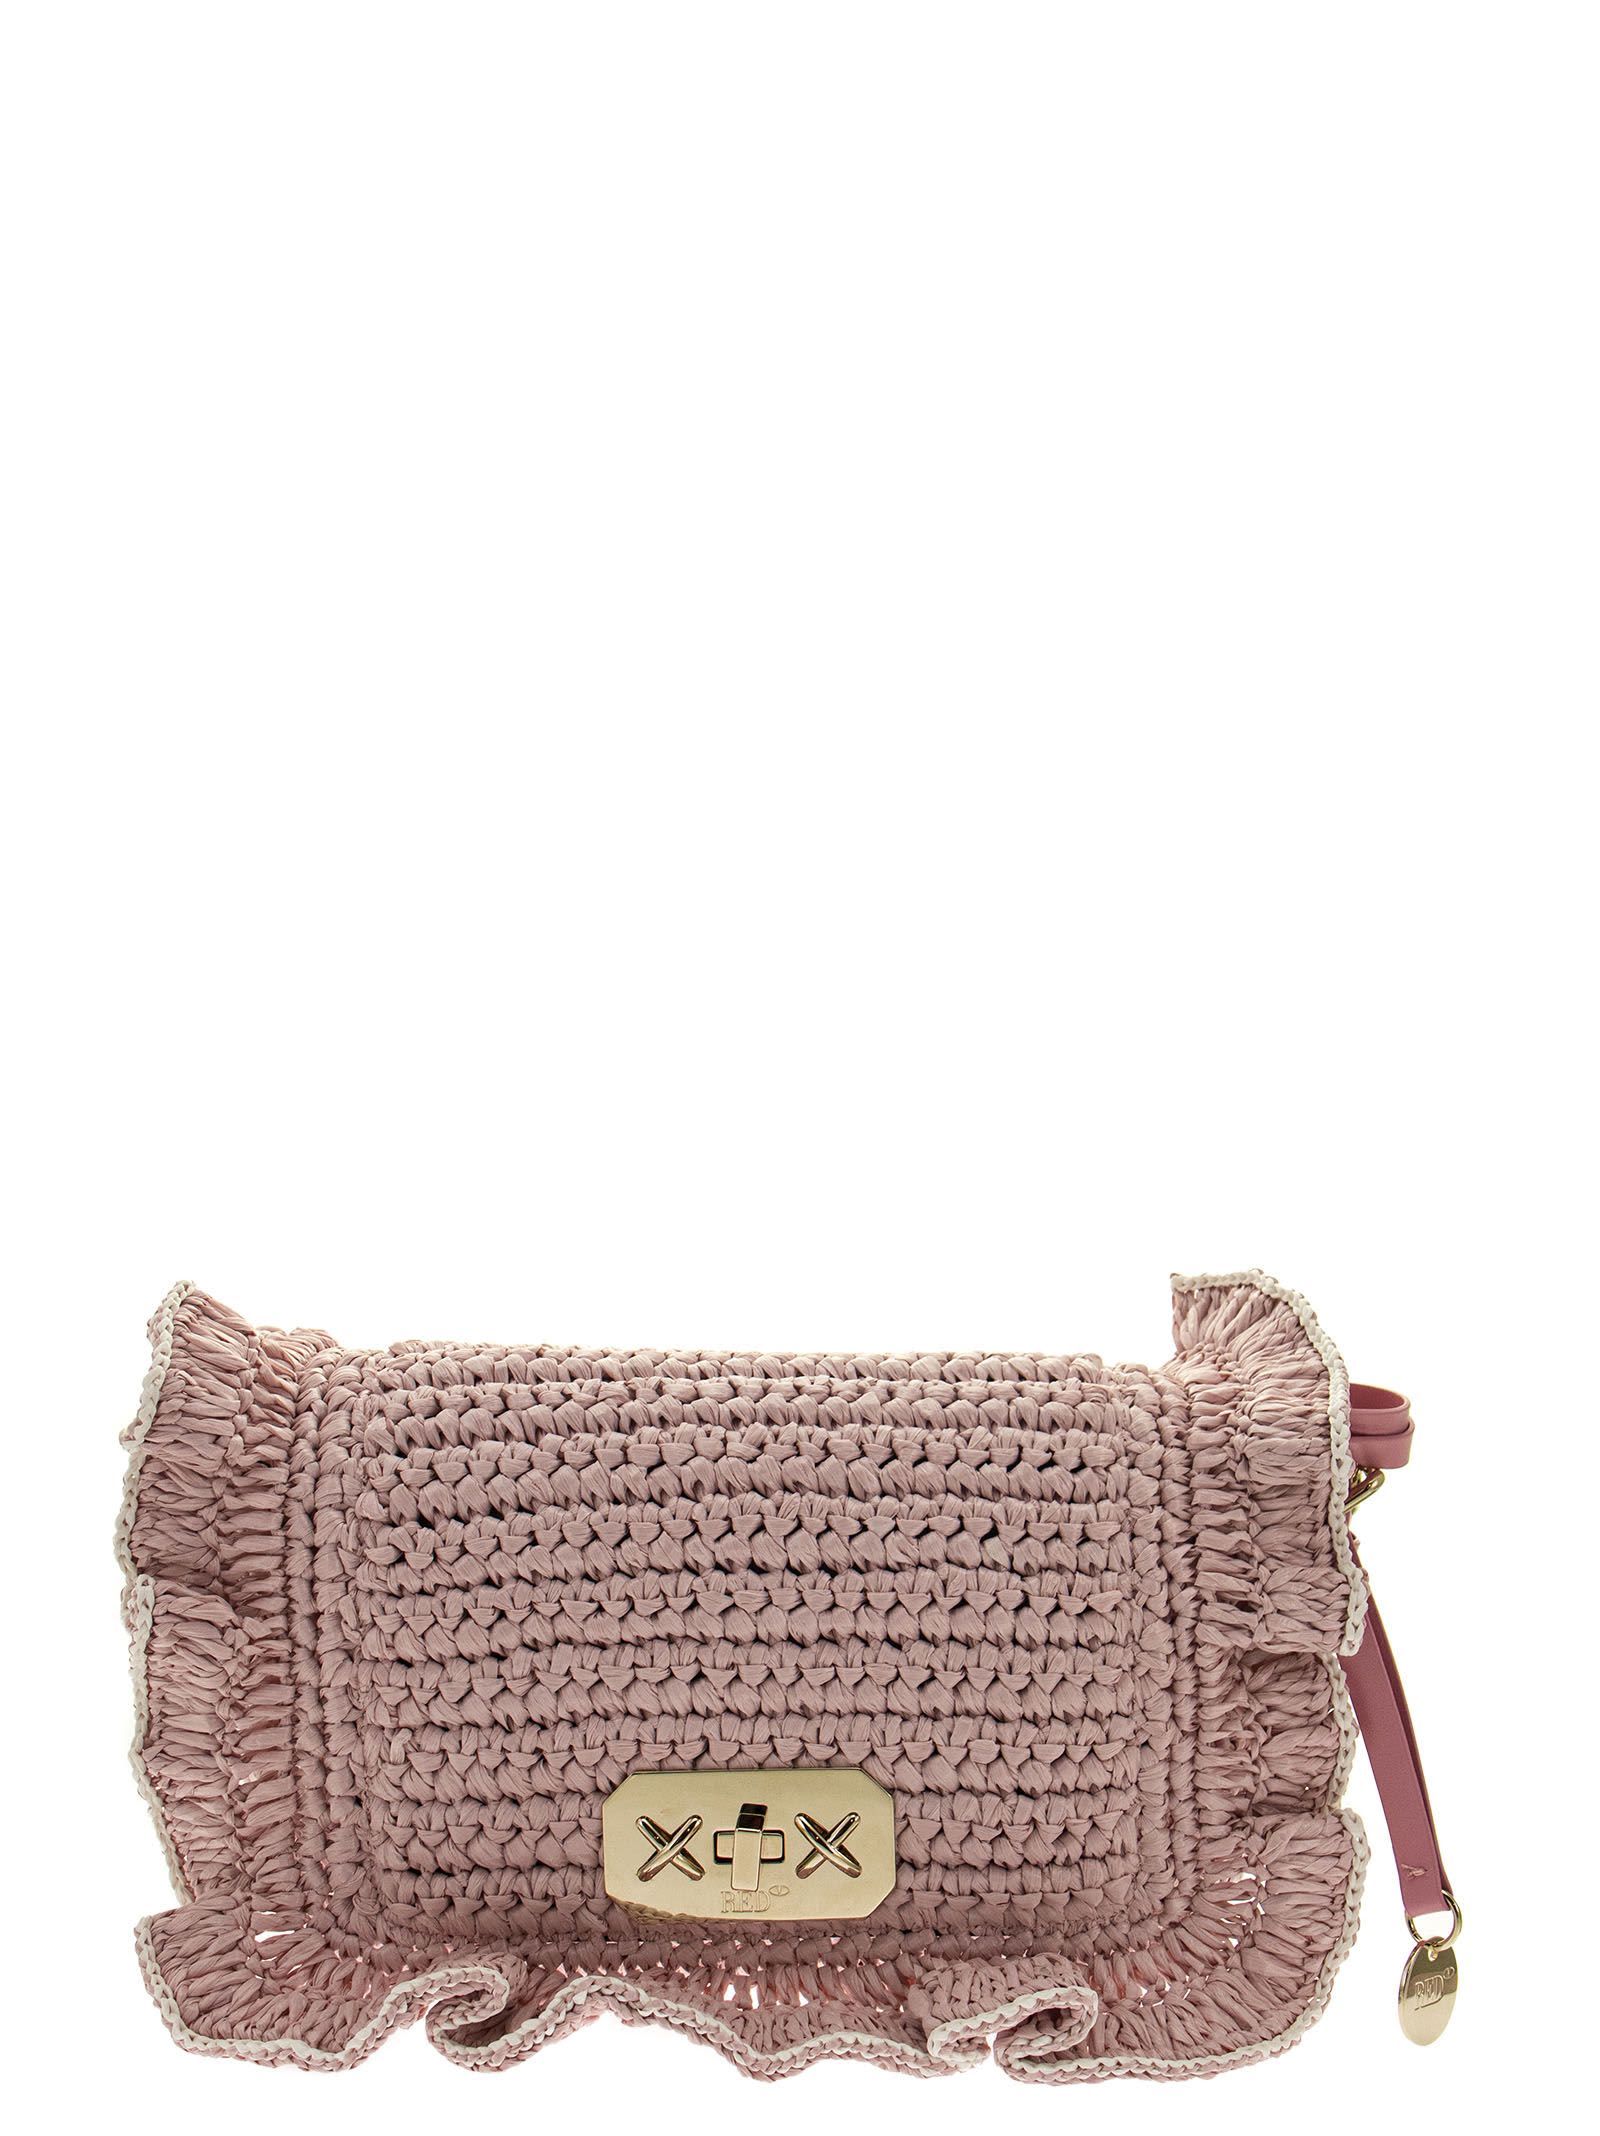 RED Valentino Shoulder Bag In Raffia With Ruffles